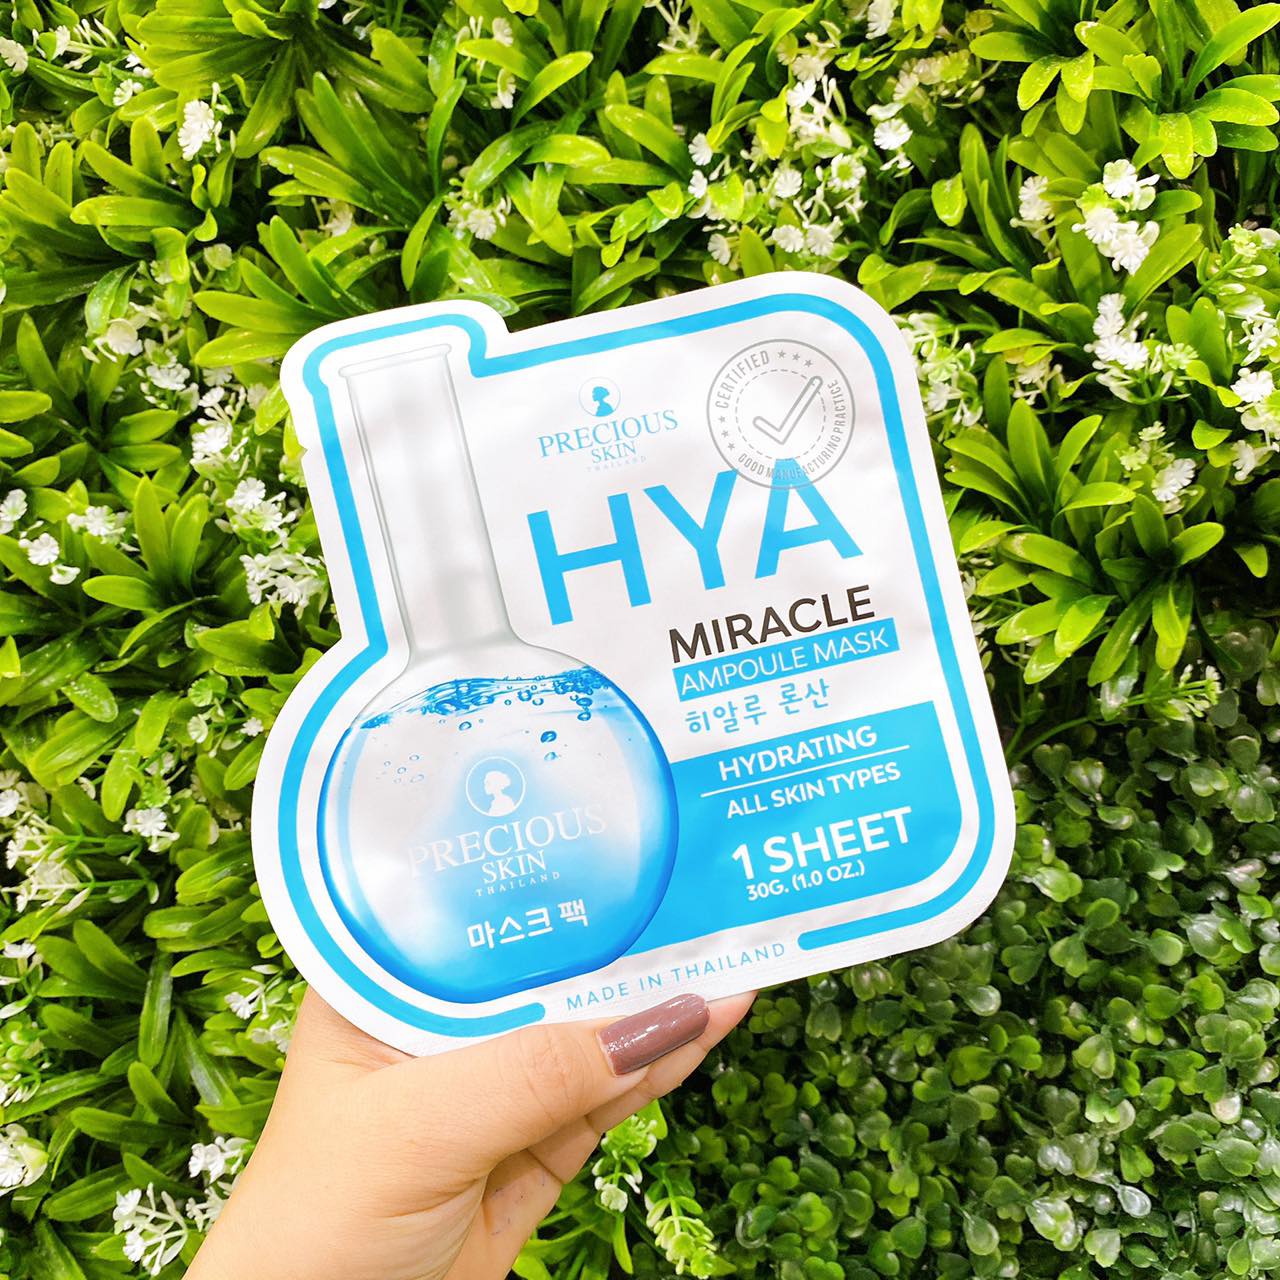 Precious Skin Thailand Hya Miracle Ampoule Mask